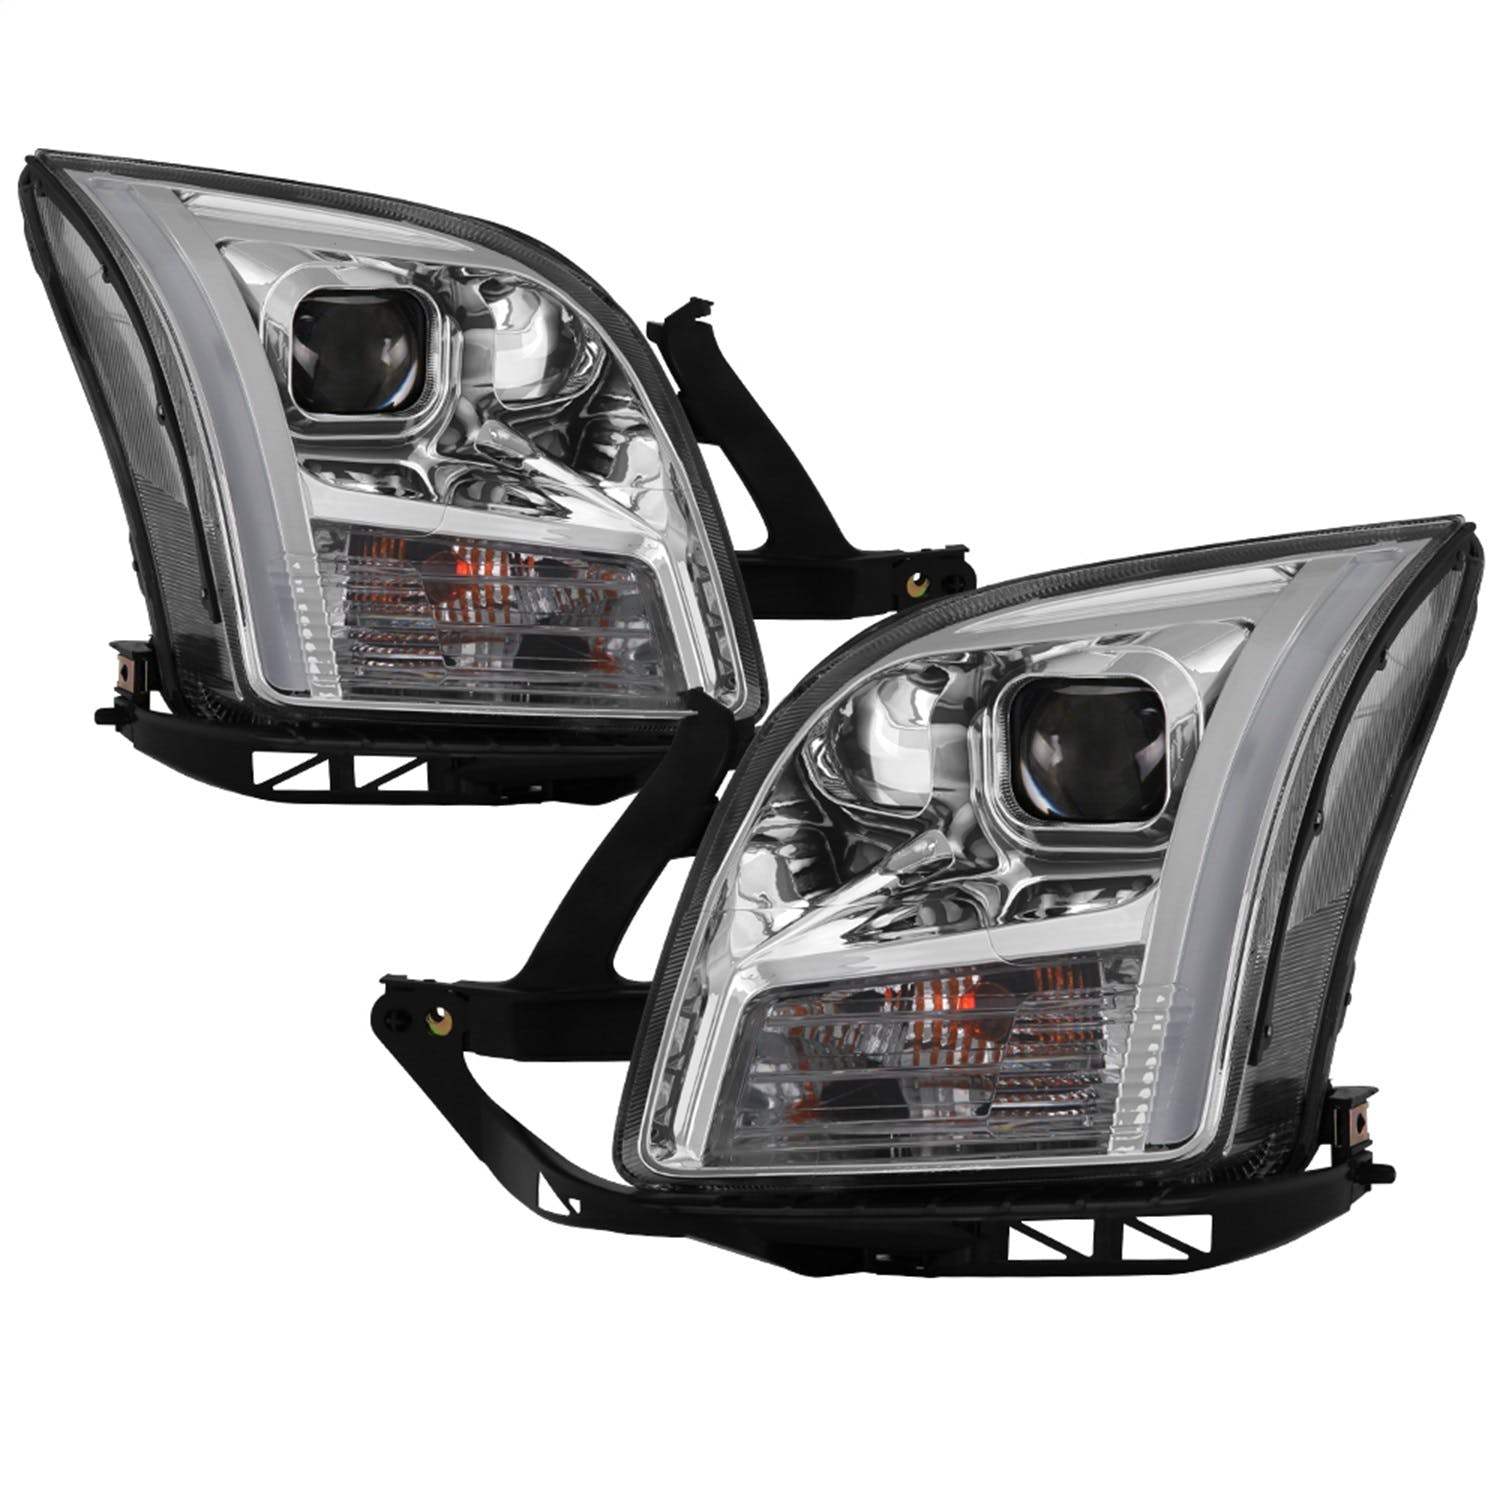 XTUNE POWER 9042126 Ford Fusion 06 09 Projector Headlights Light Bar DRL Chrome